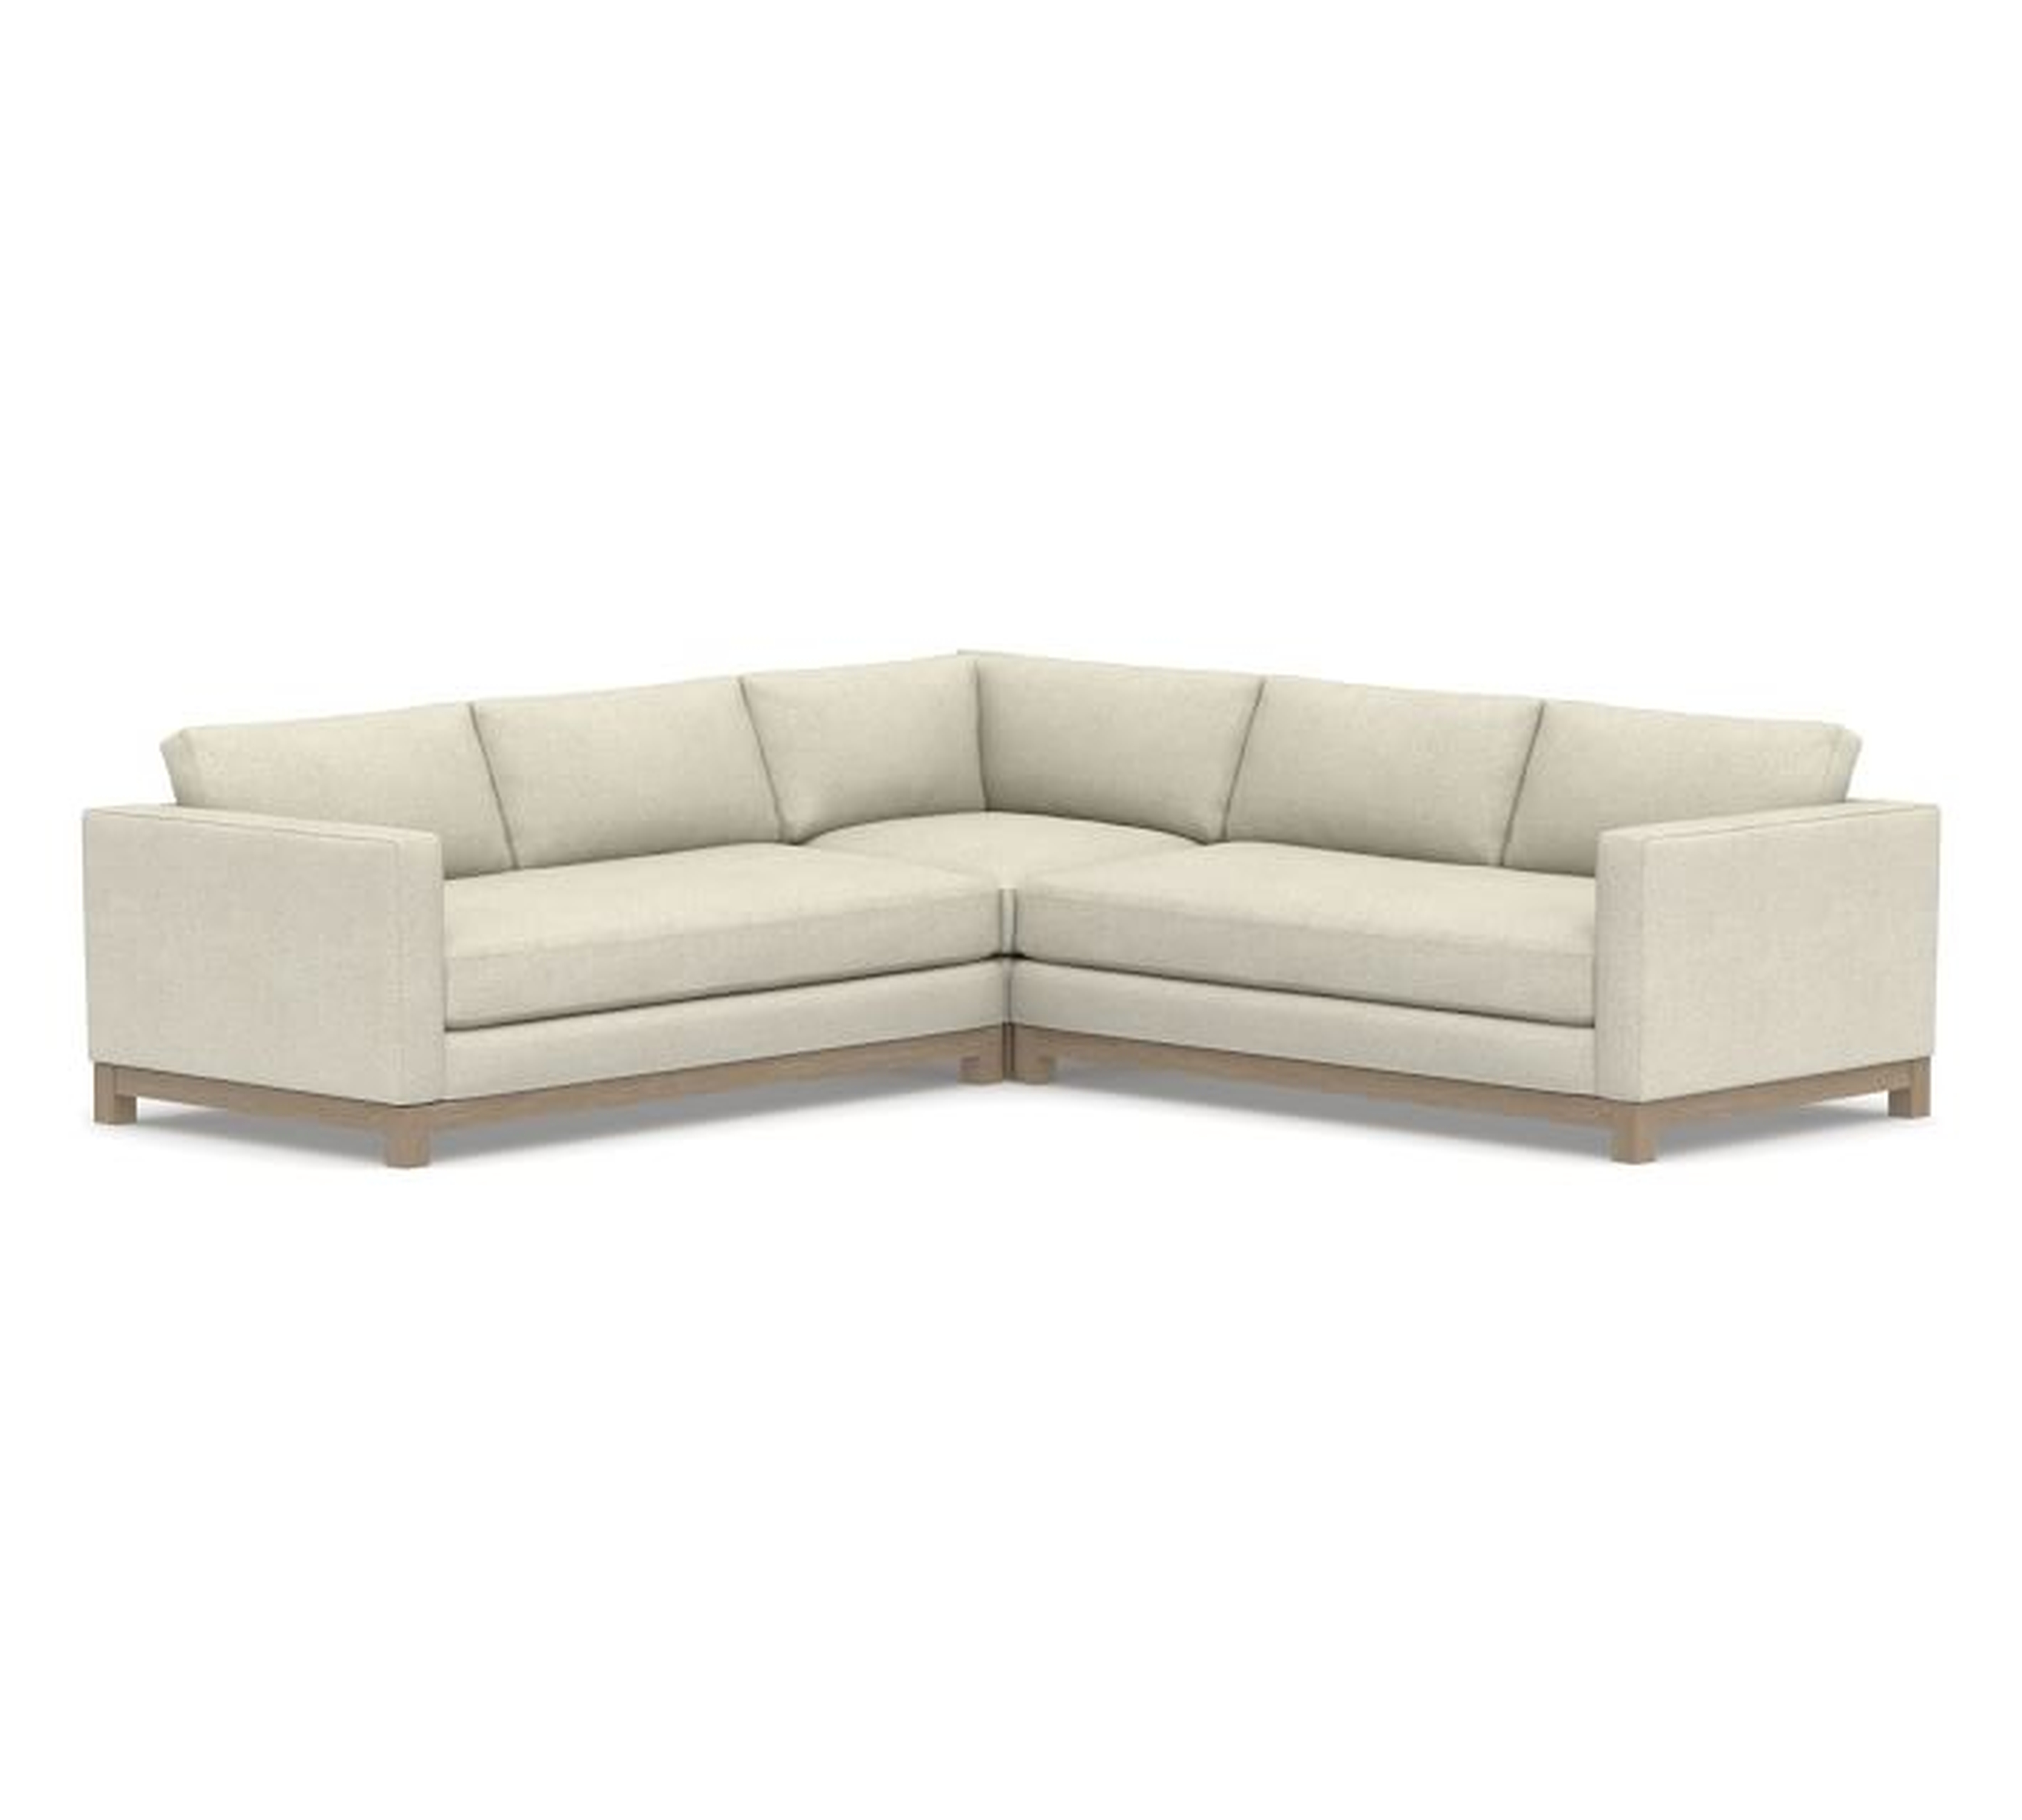 Jake Upholstered 3-Piece L-Shaped Corner Sectional 2x1, Bench Cushion, with Wood Legs, Polyester Wrapped Cushions, Performance Heathered Basketweave Alabaster White - Pottery Barn